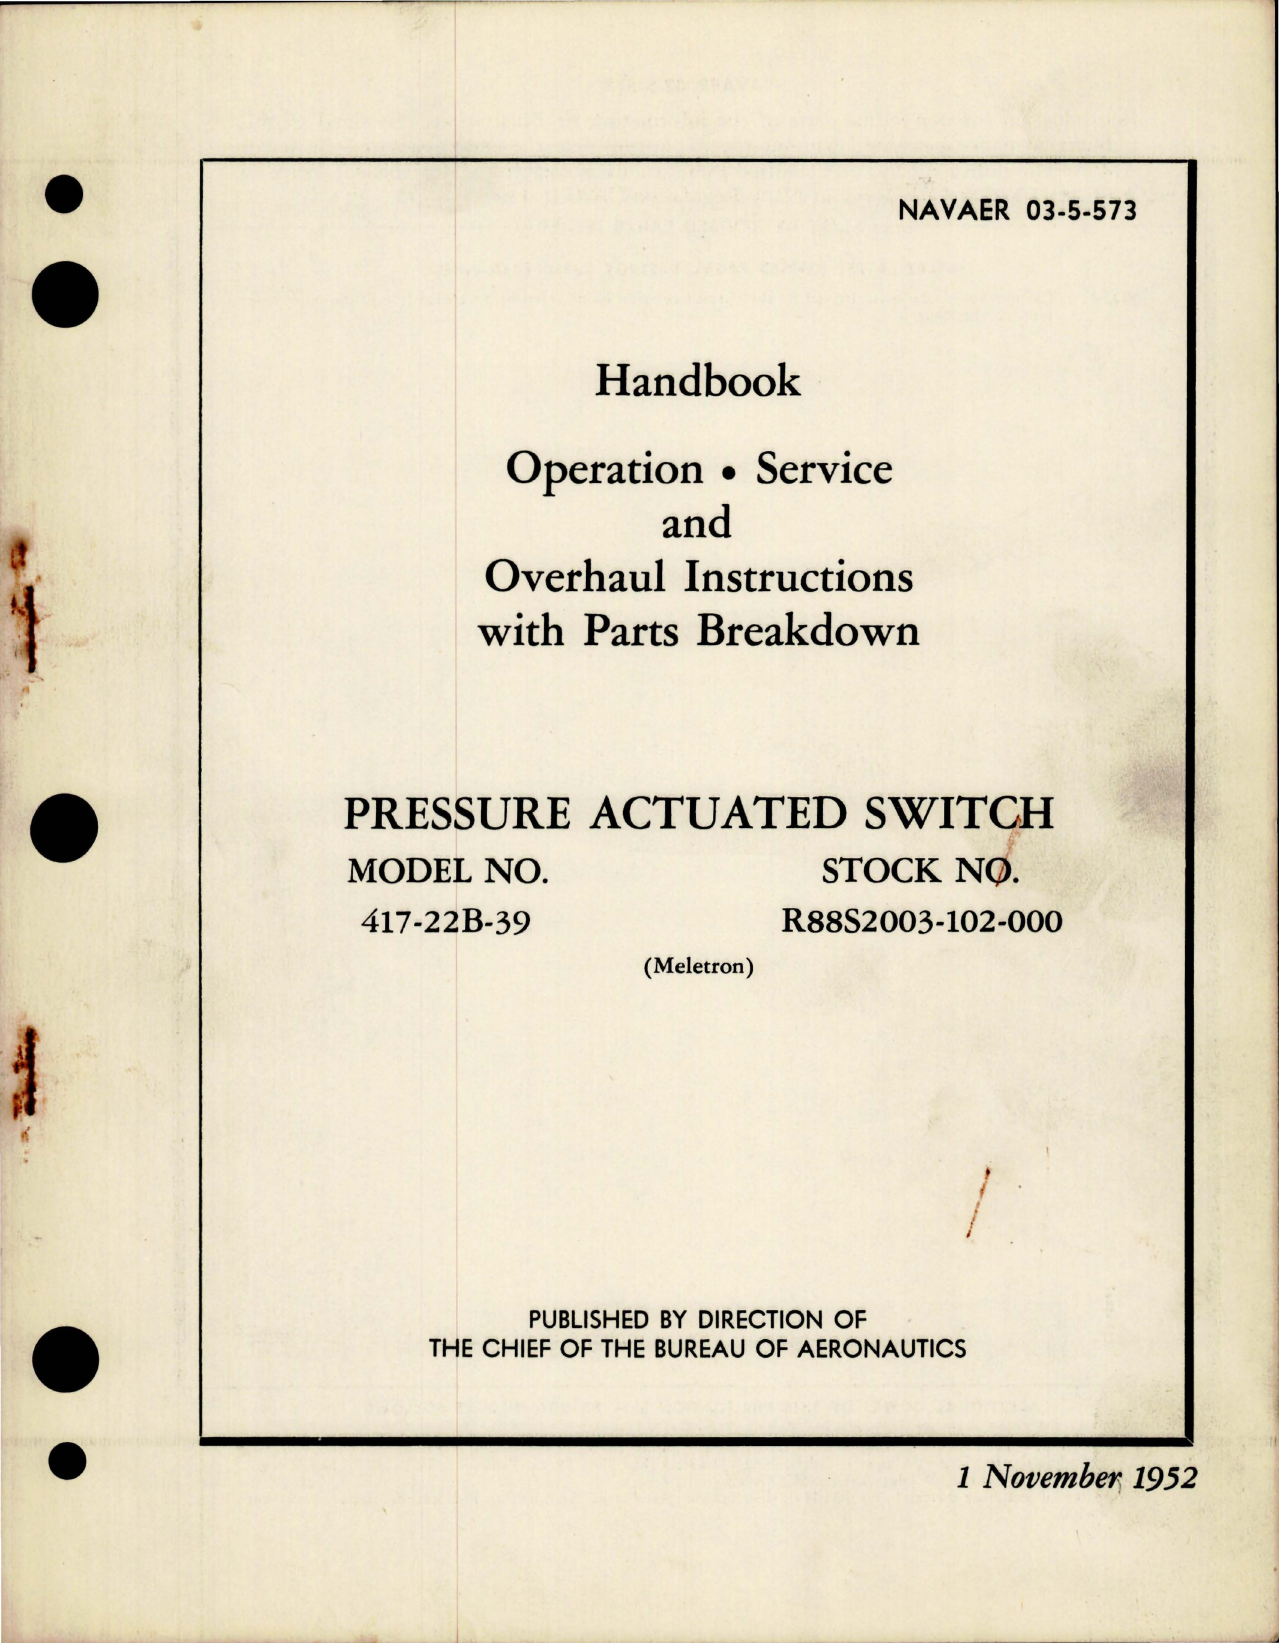 Sample page 1 from AirCorps Library document: Operation, Service, Overhaul, and Parts for Pressure Actuated Switch - Model 417-22B-39 